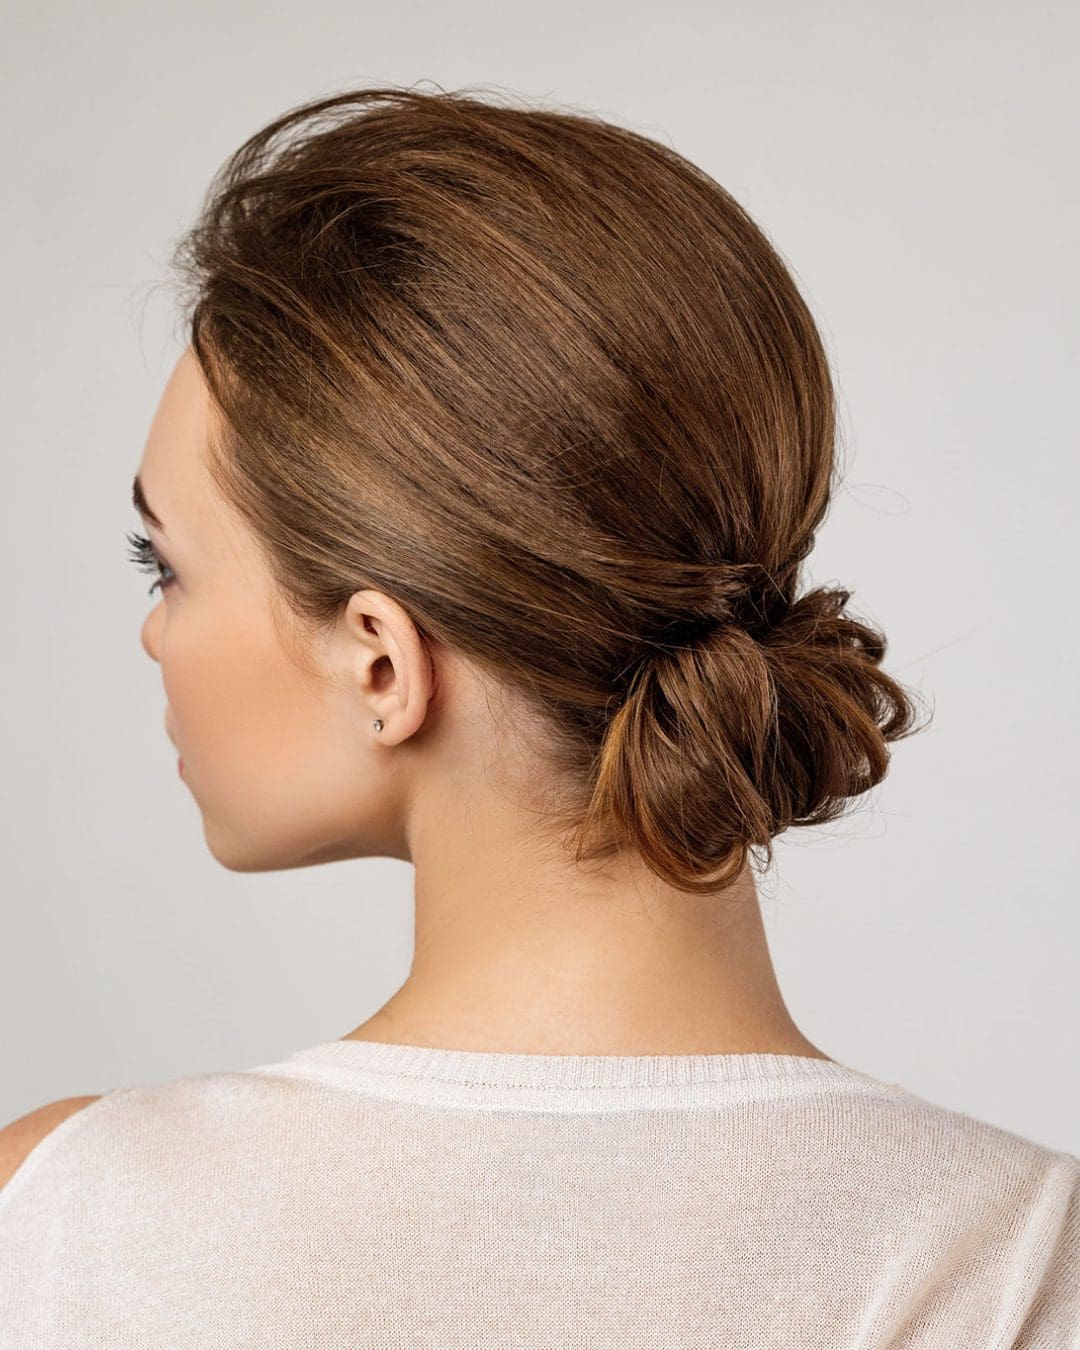 Image of Messy bun hairstyle for 3 day hair